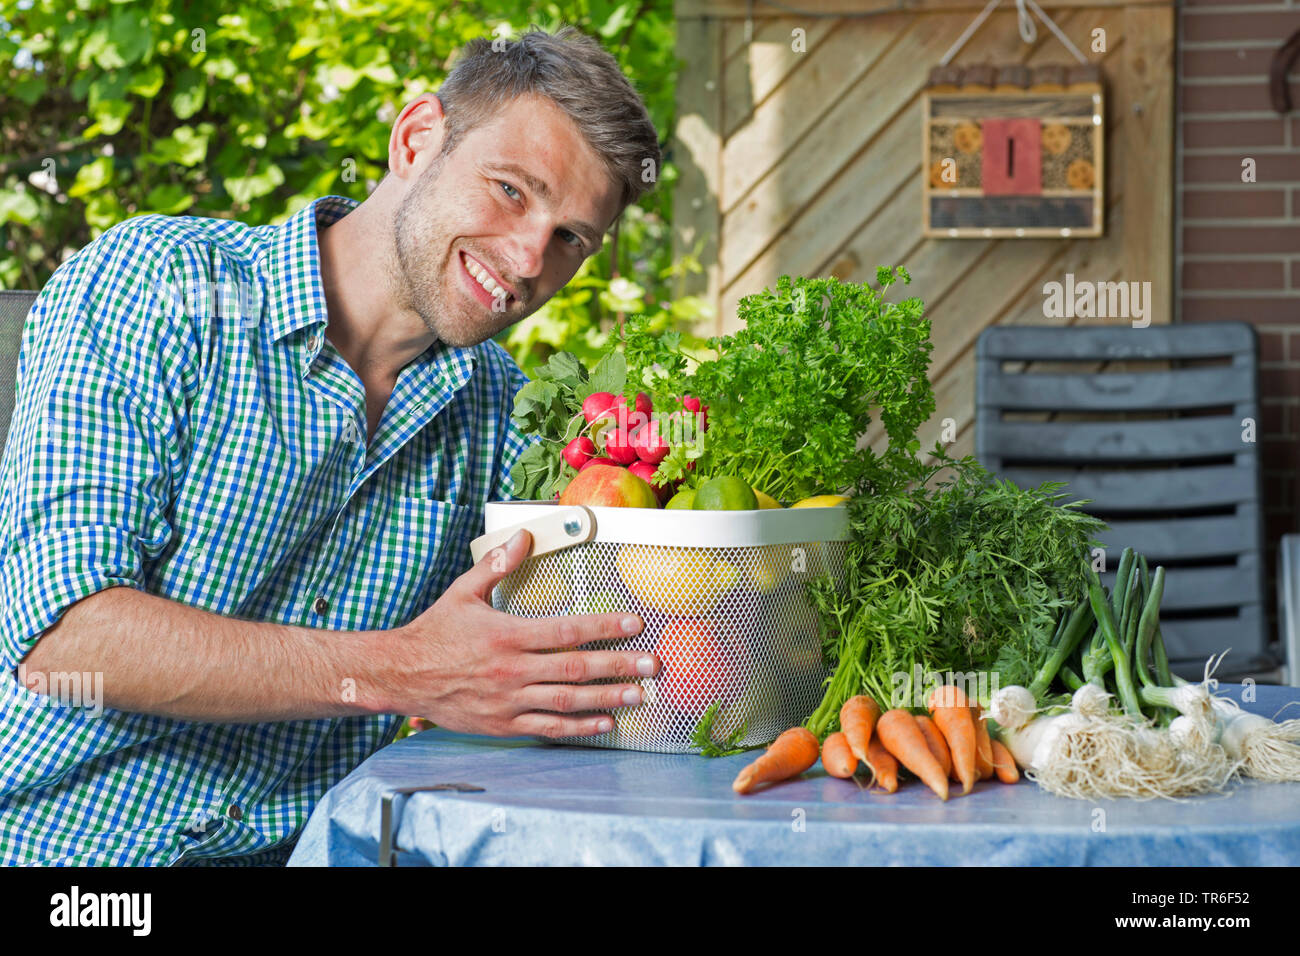 young man with fruit and vegetable basket, Germany Stock Photo